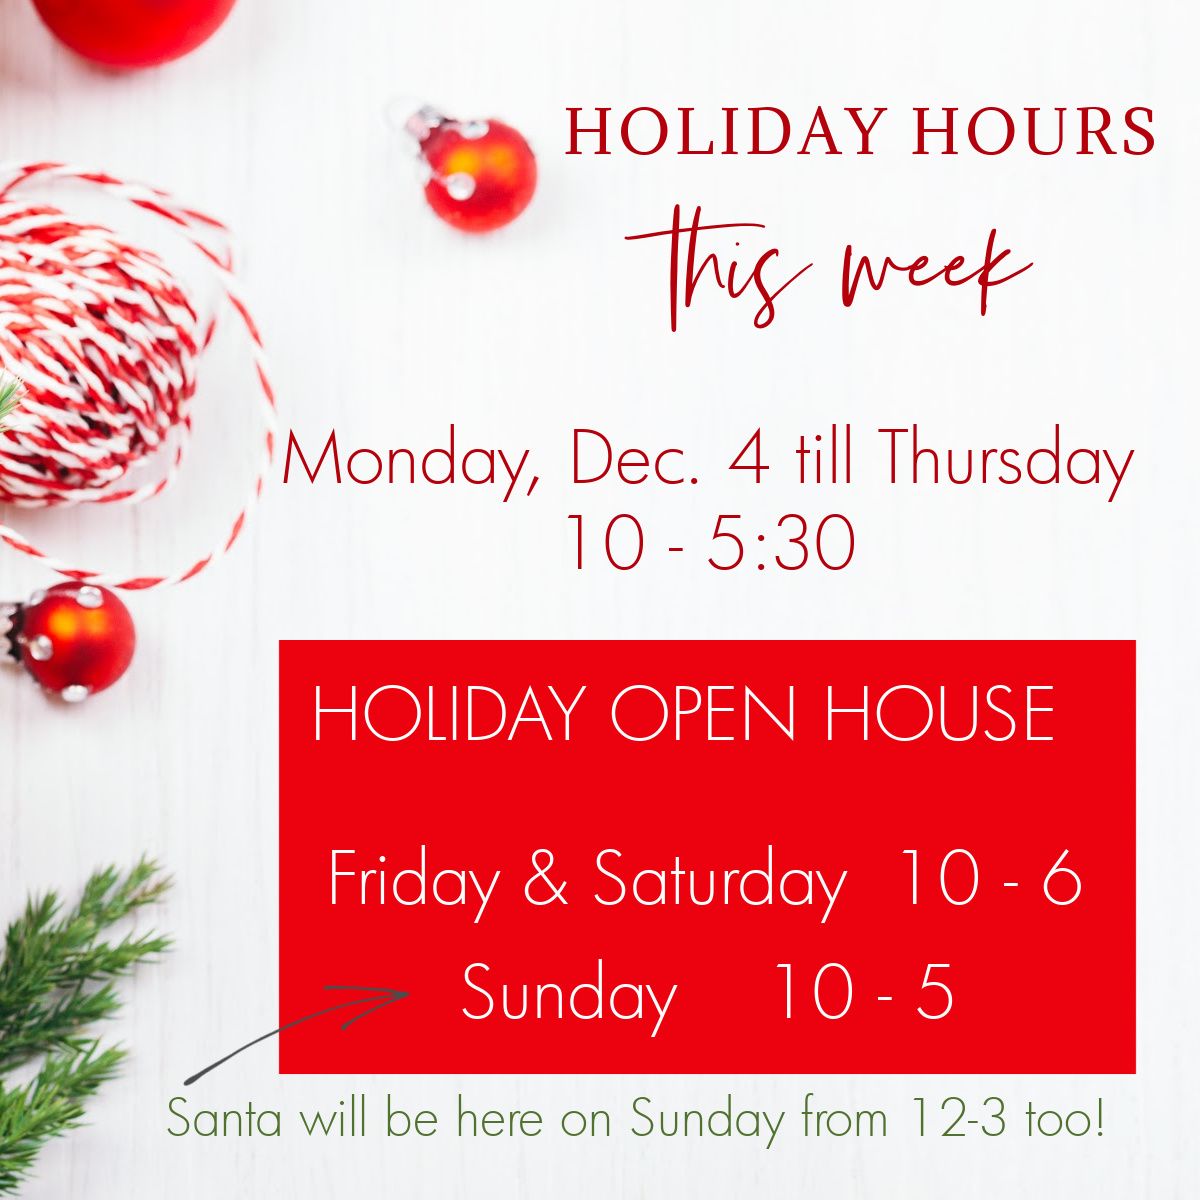 O P E N all week and our Holiday Open House {last sale of the season} is this Friday - Sunday!⁠
⁠
#shoplocal #shopsmall #gifthandmade #sniffhere #noteology #537wyomingave #scranton